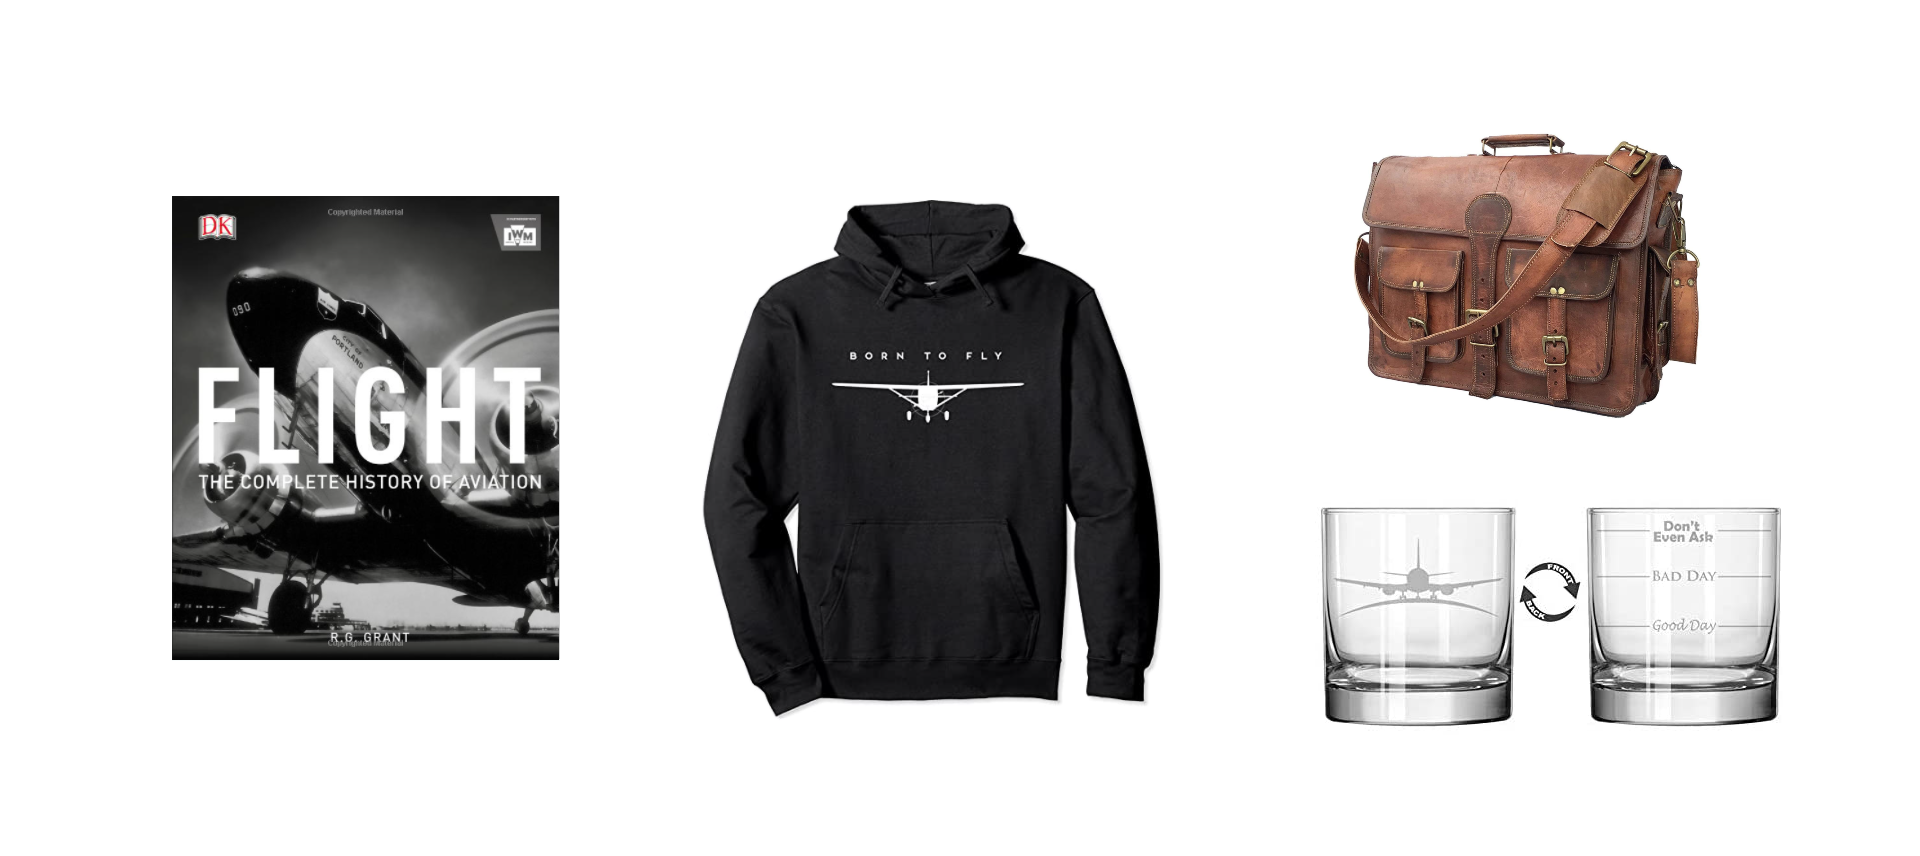 Picture of book, hoodie, laptop shoulder bag, and whiskey glasses, all customized with pilot graphics.